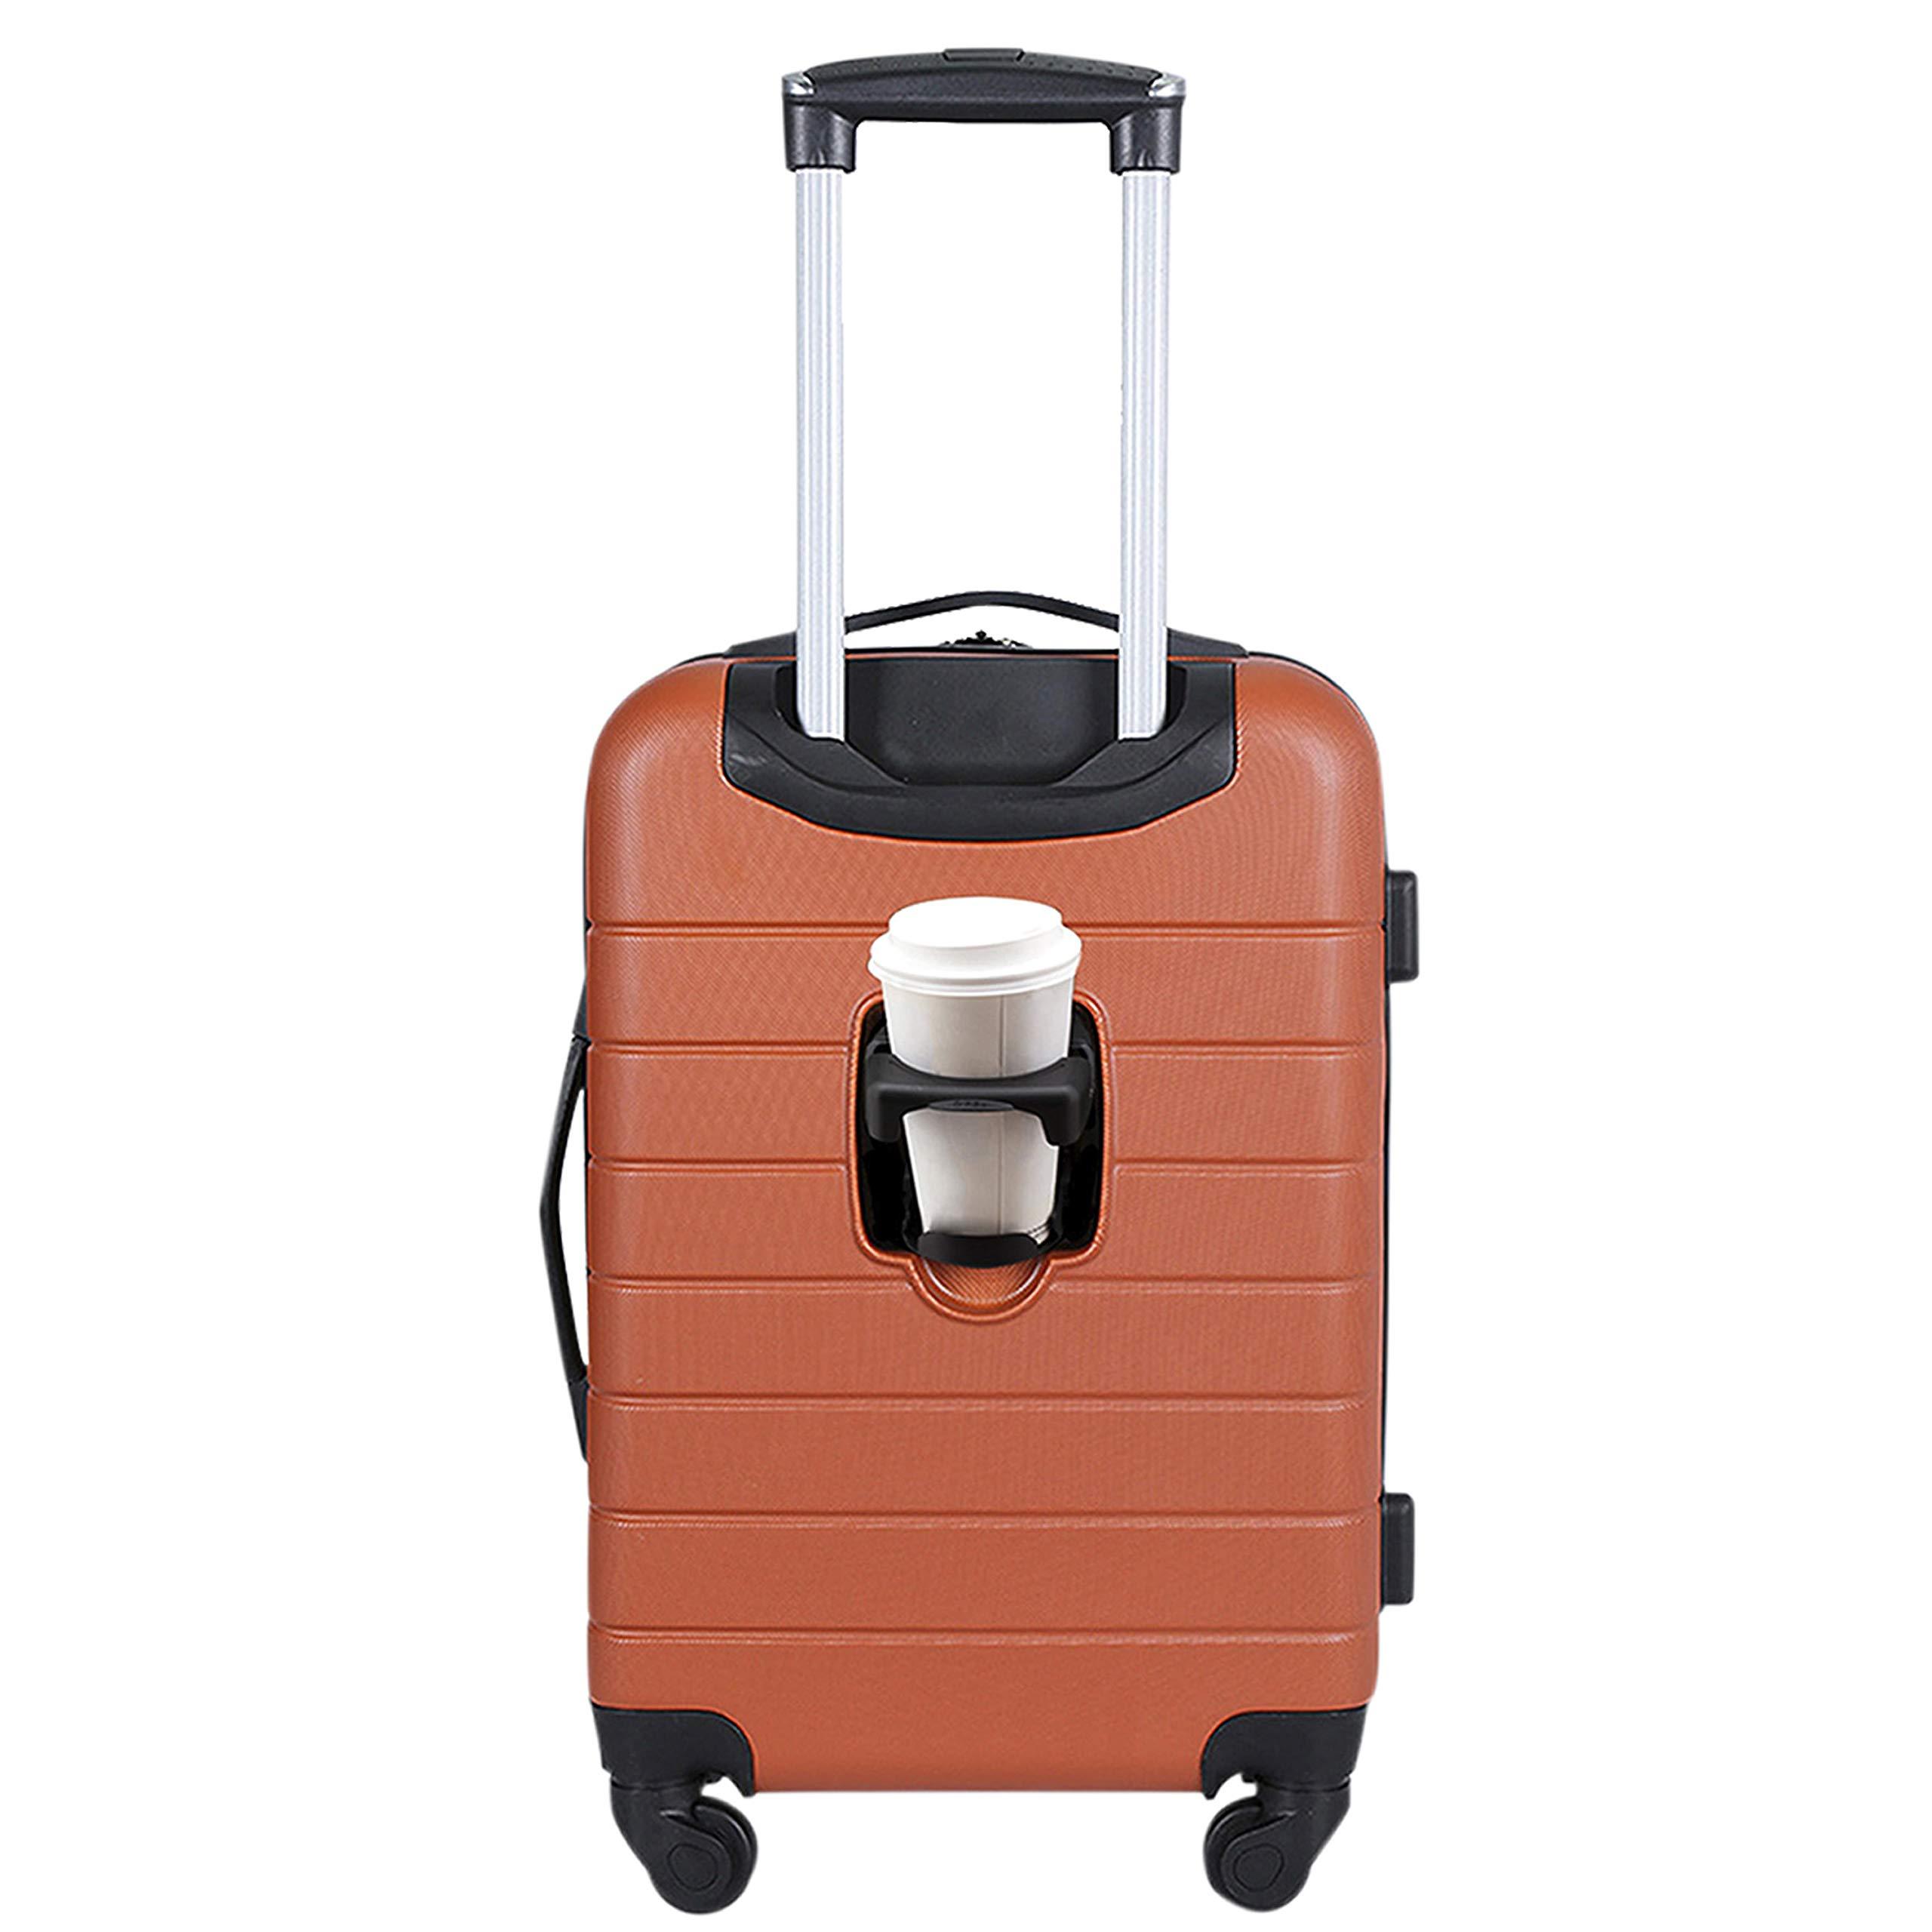 Wrangler Smart Luggage Set With Cup Holder And Usb Port | Lyst UK